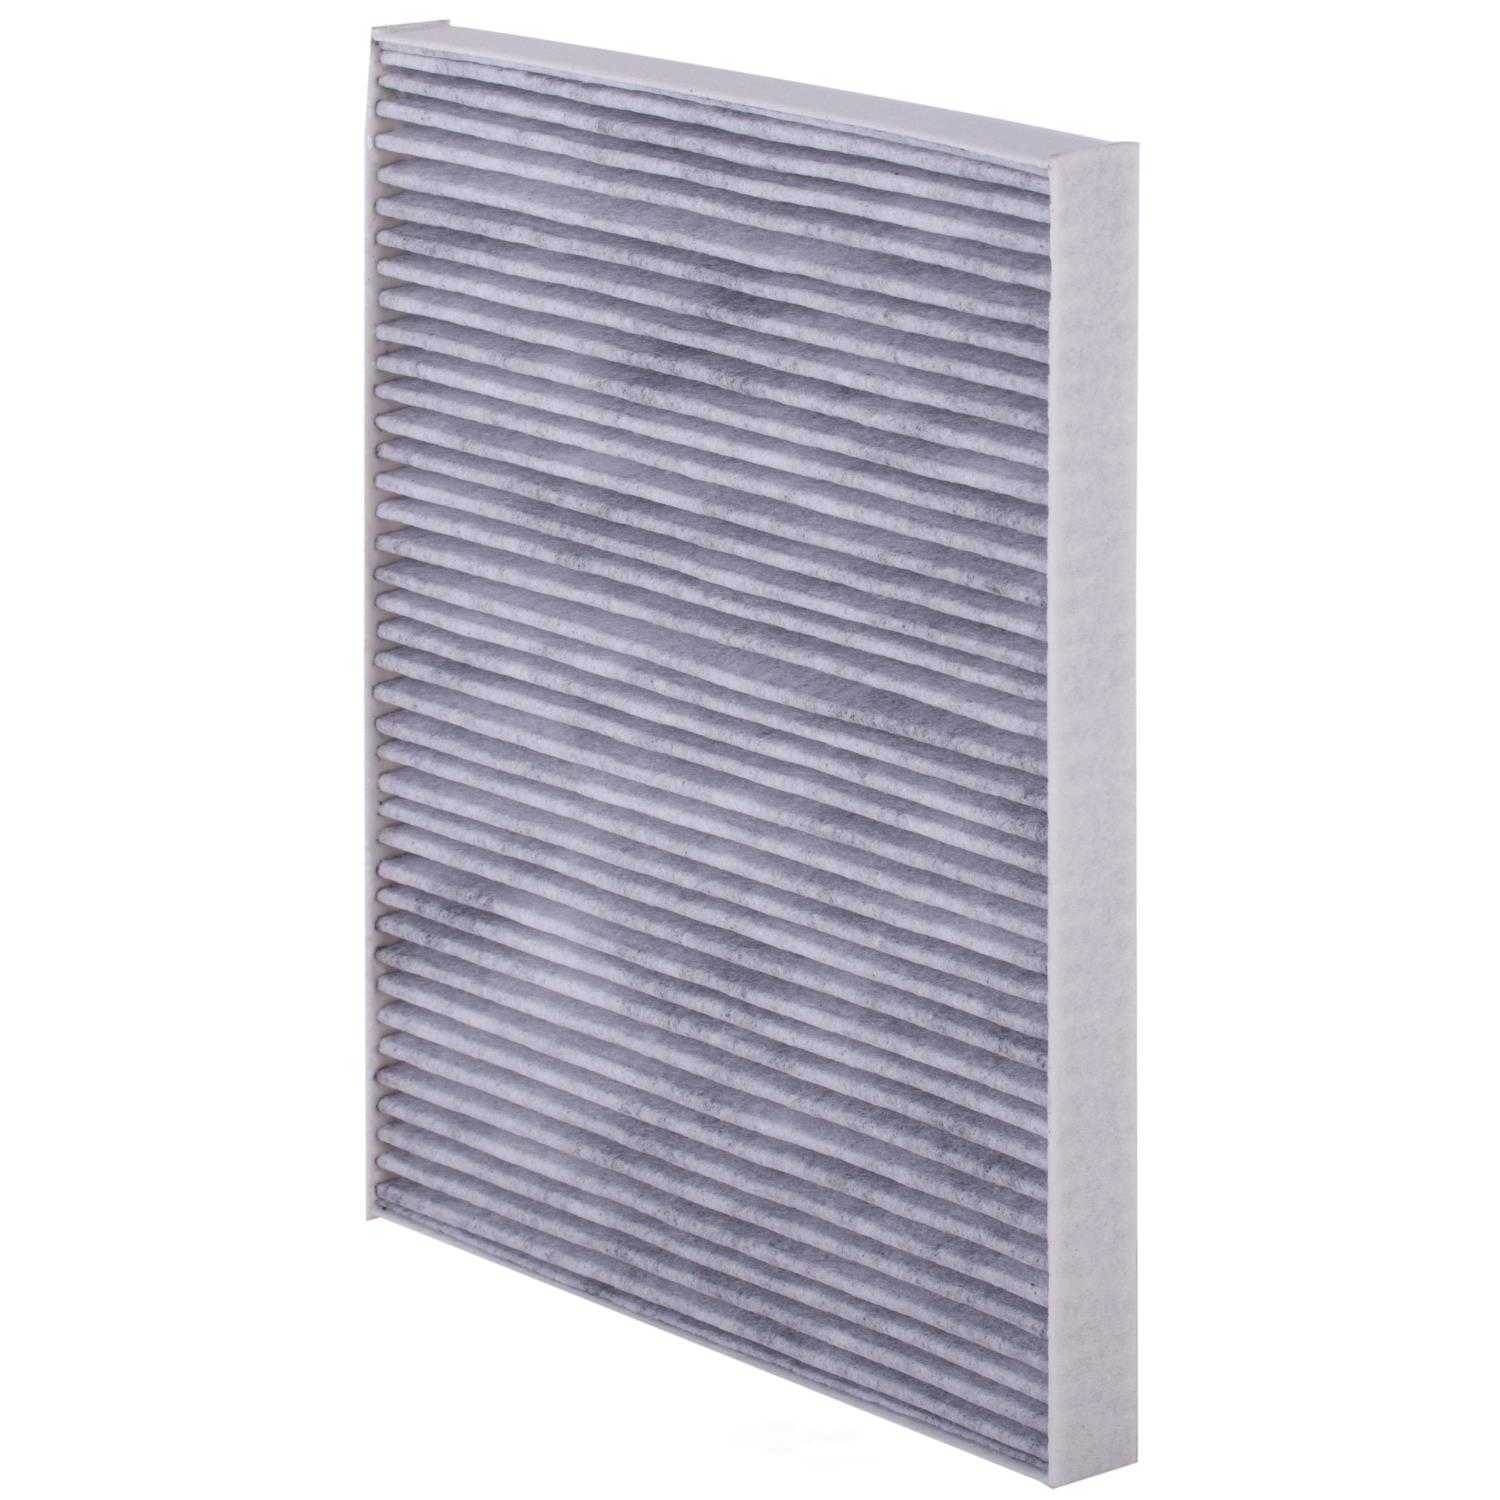 PARTS PLUS FILTERS BY PREMIUM GUARD - Charcoal Media - PLF CAF9353